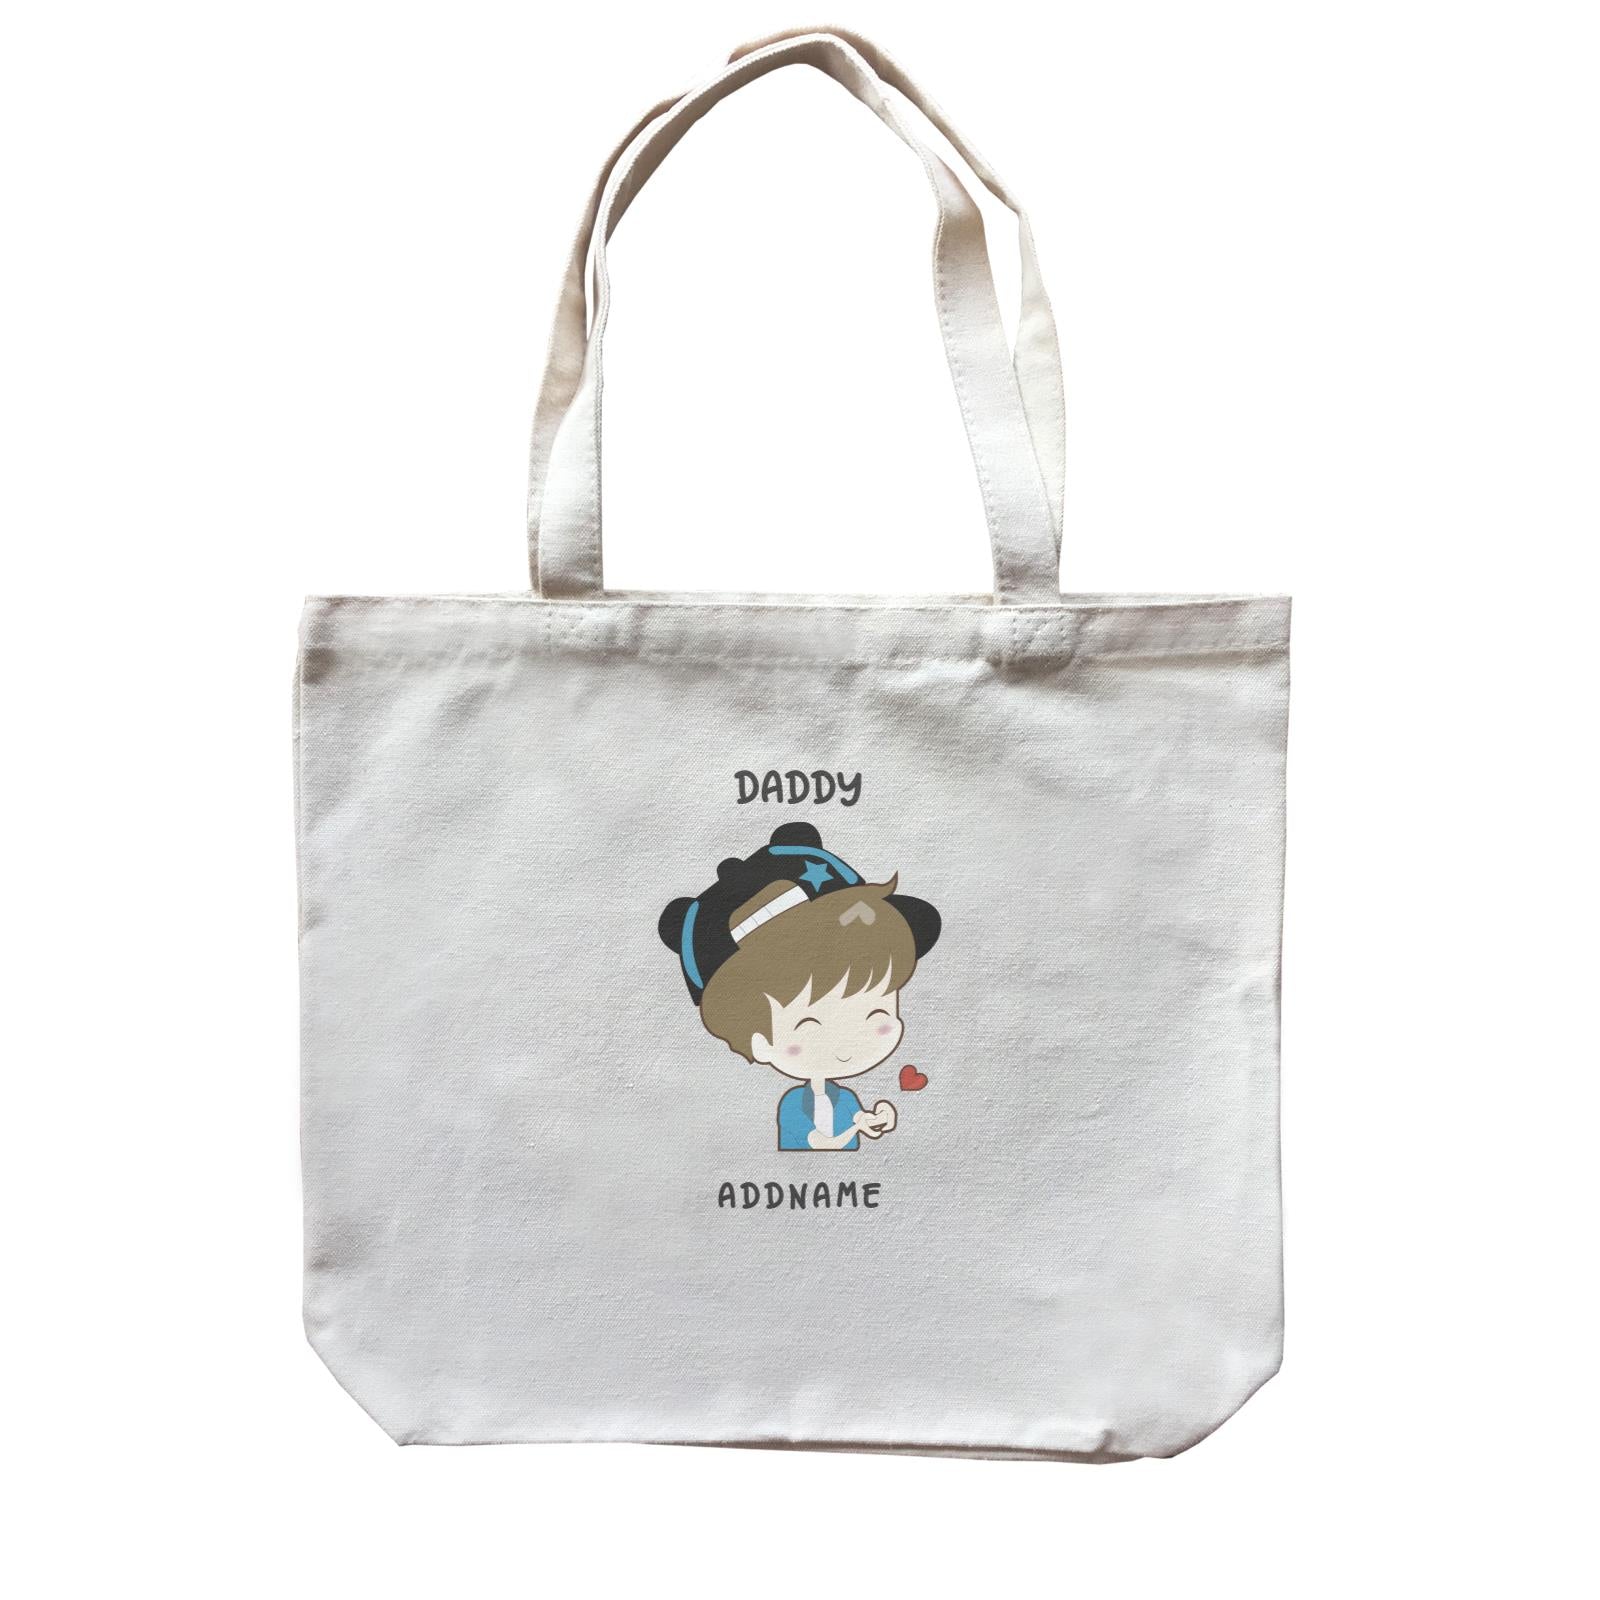 My Lovely Family Series Daddy Addname Canvas Bag